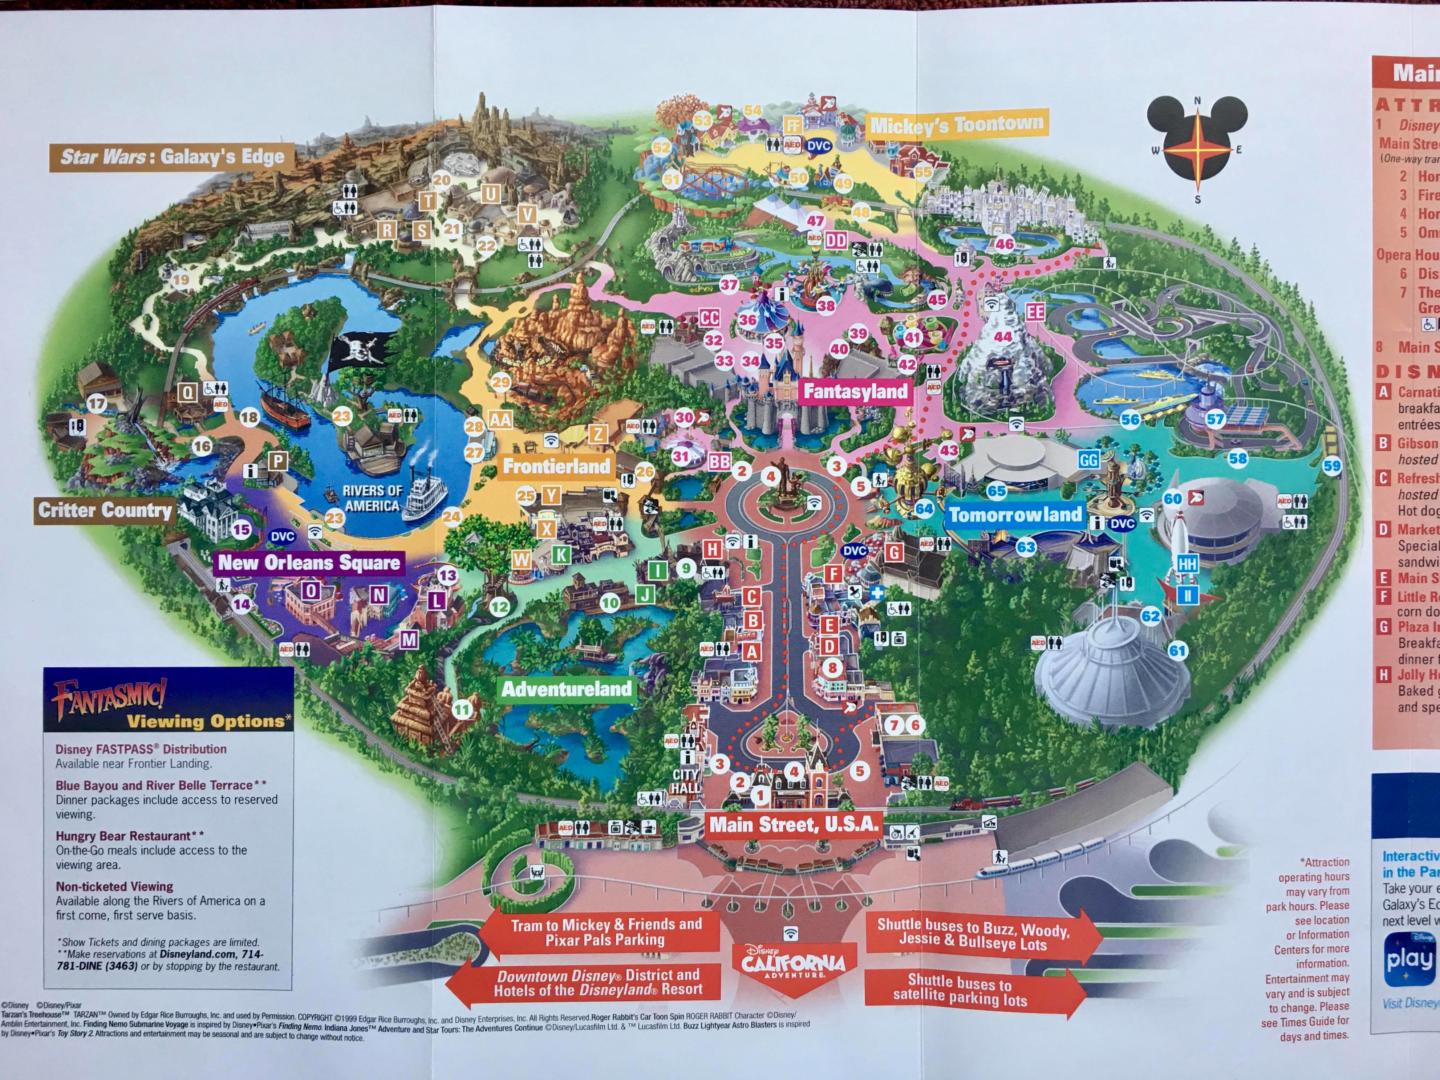 Micechat Disneyland Resort Features Star Wars Galaxy S Edge Mickey S Most Magical Map Yet Galaxy S Edge New Park Map Revealed